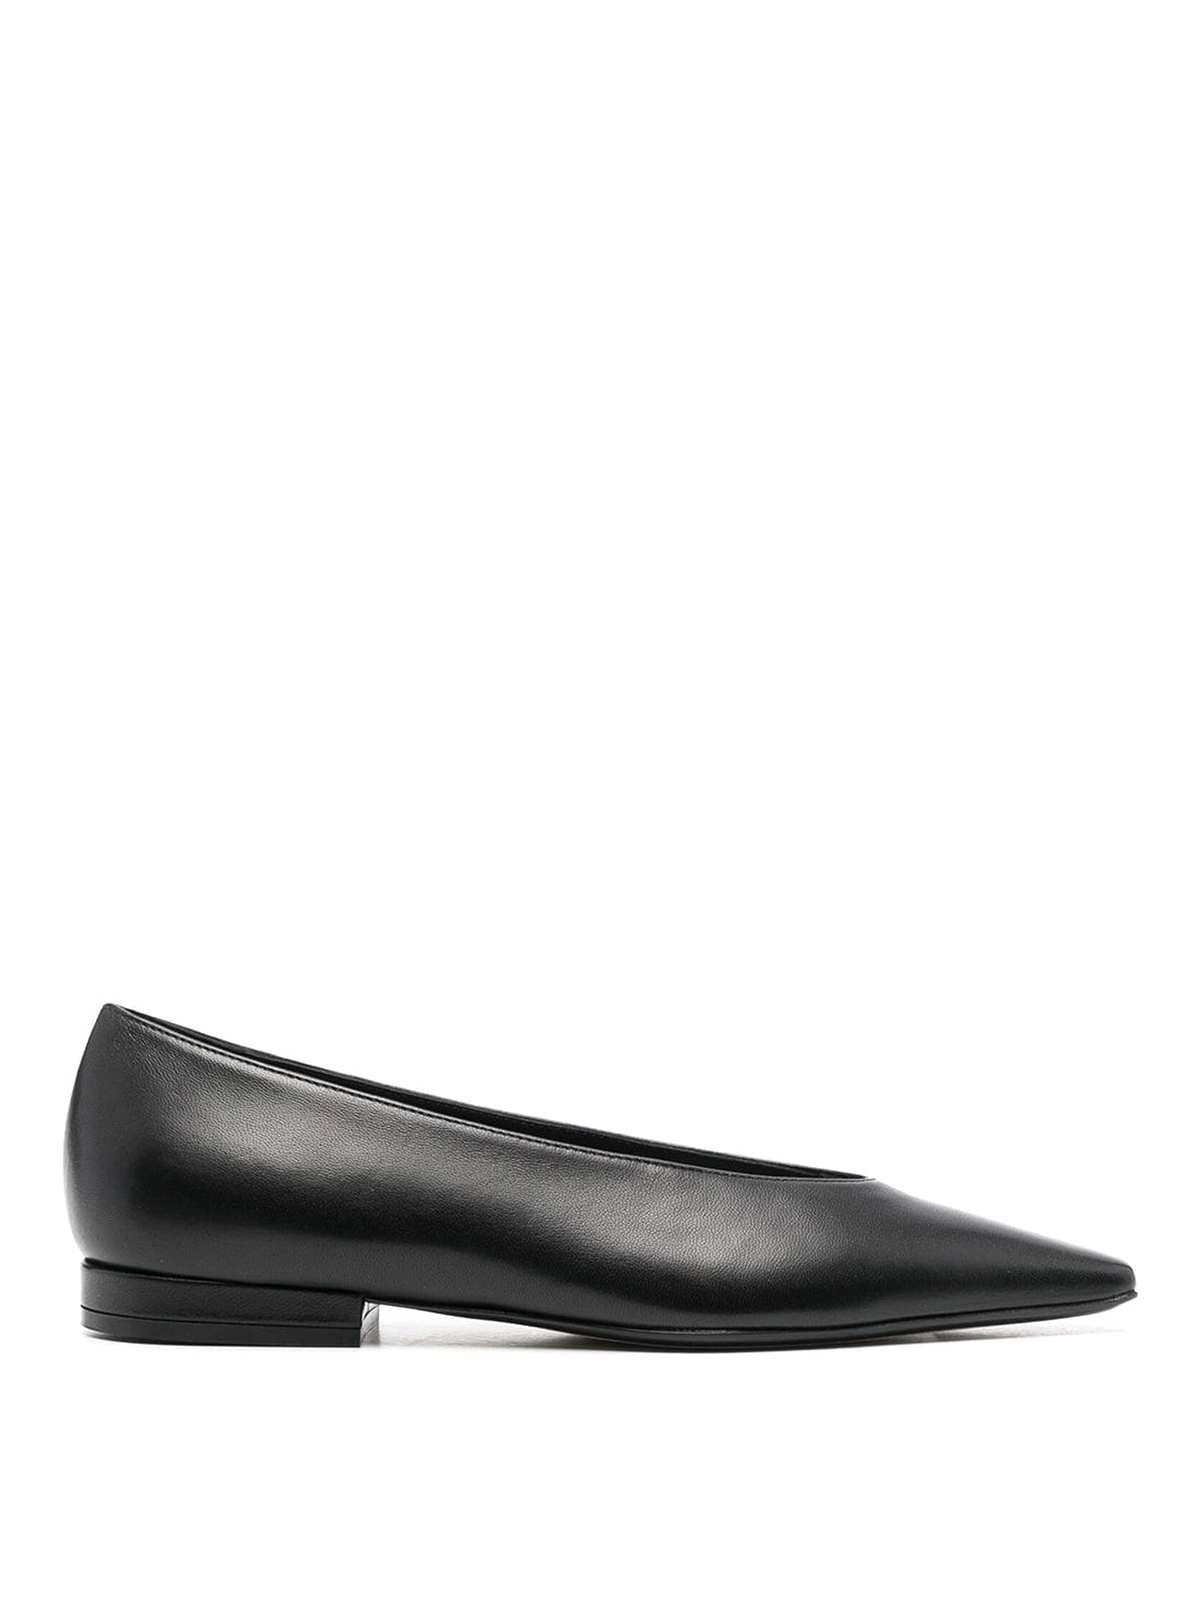 Lanvin Swing Flats With Pointed Toe In Black